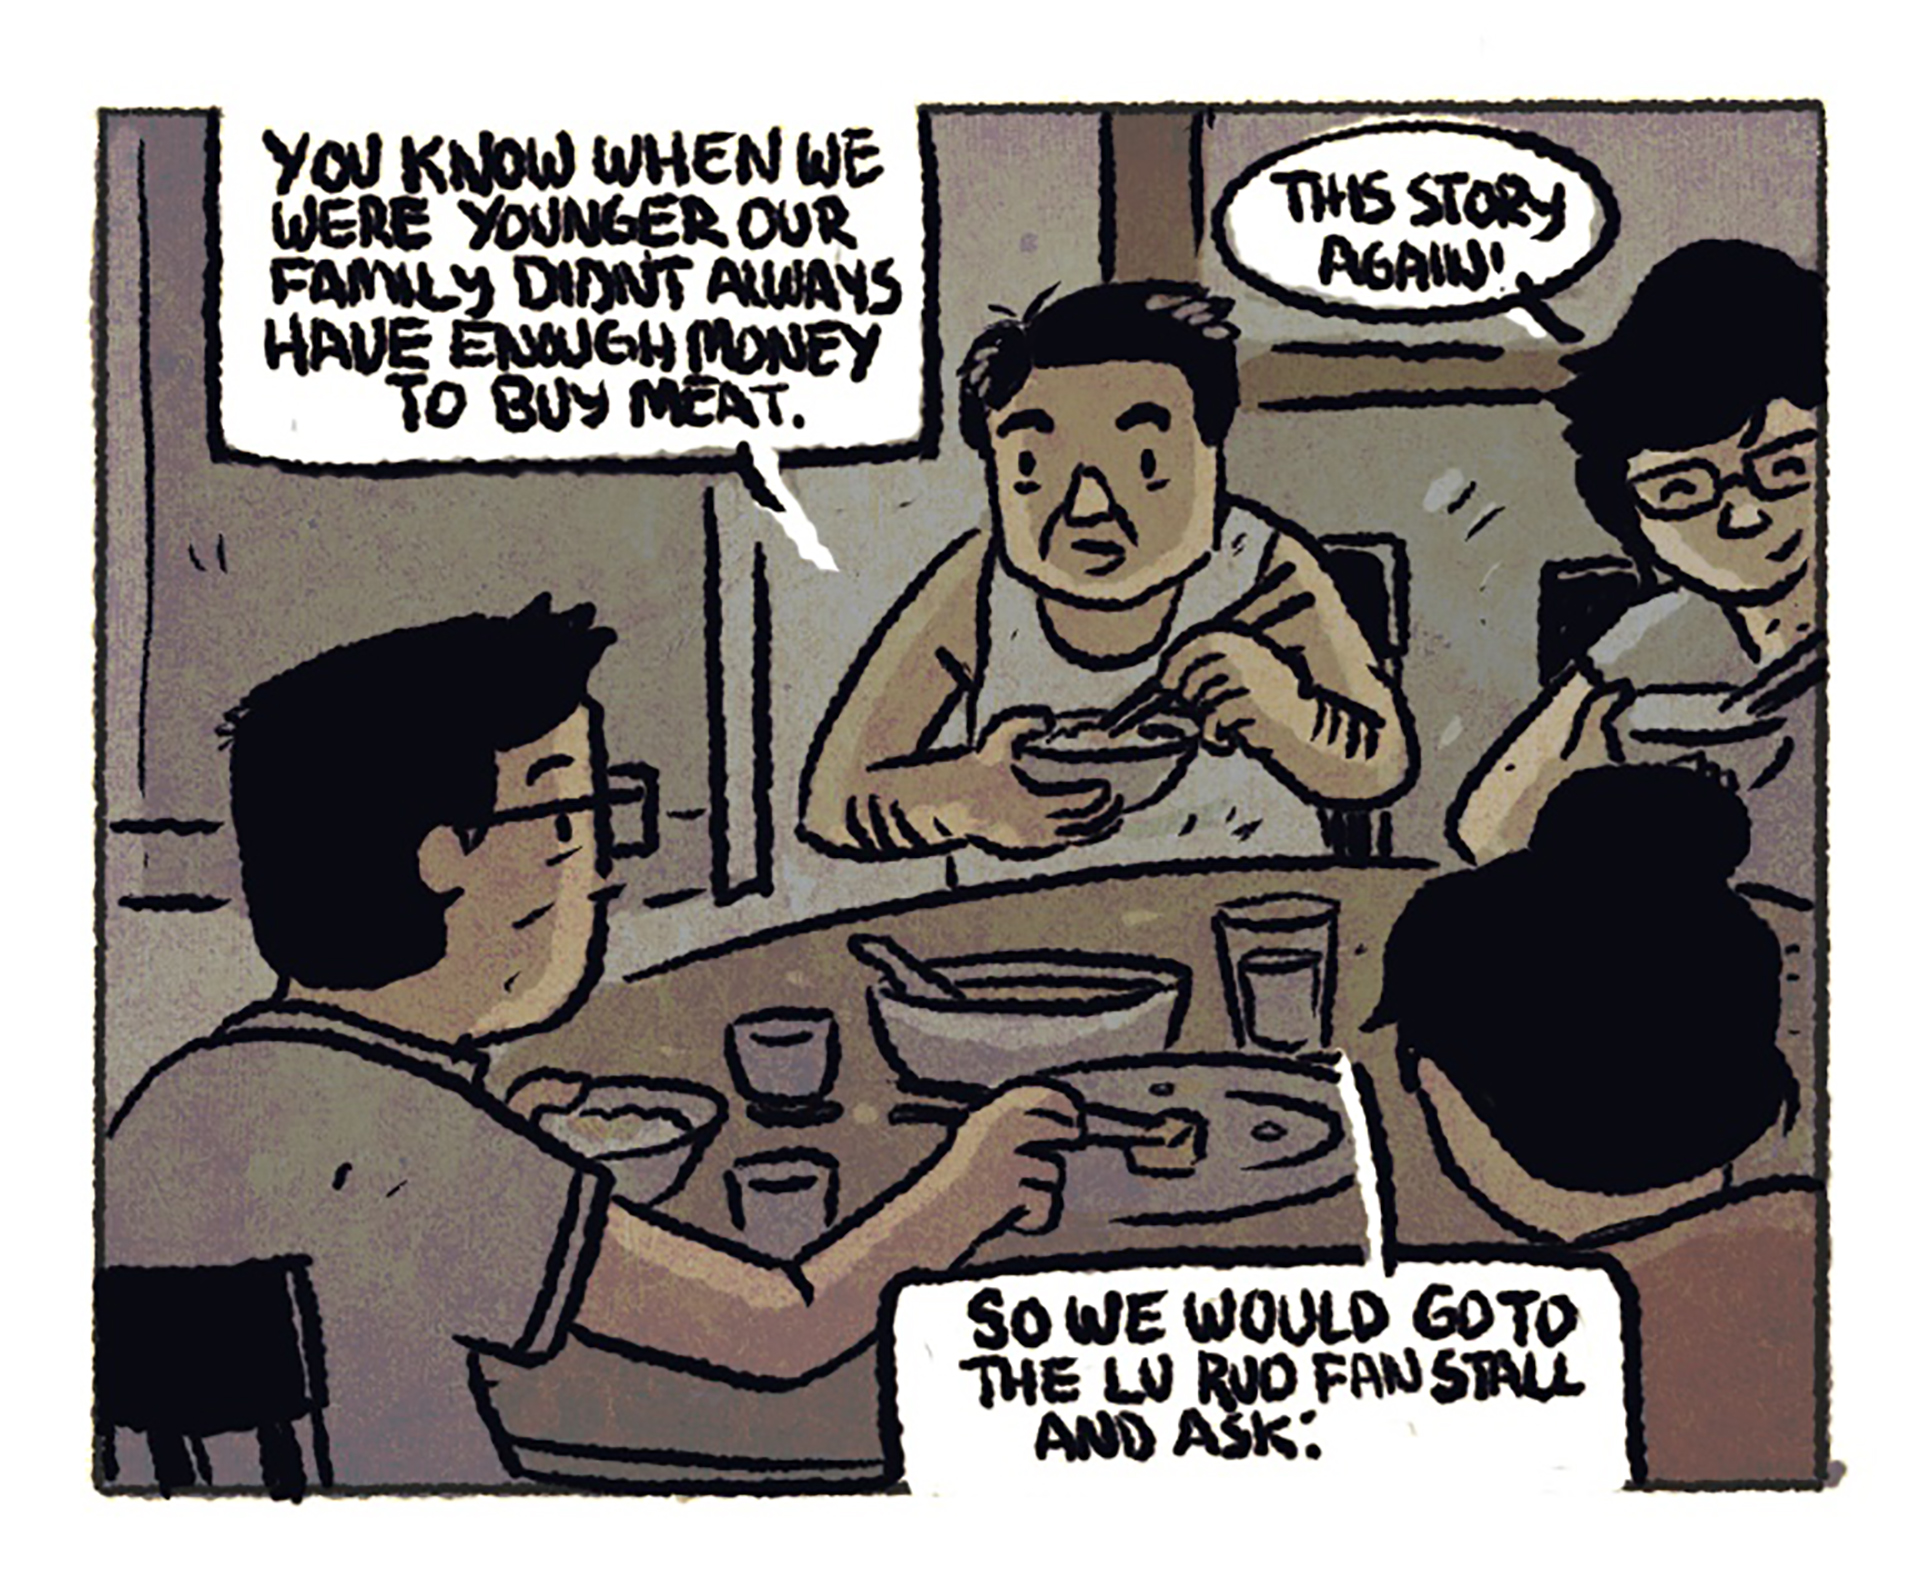 The scene shifts to a flashback; a Taiwanese family sits around the dinner table, including an older gentleman in a white tank top. Speech bubble #1: "You know when we were younger our family didn't always have enough money to buy meat." Speech bubble #2: "This story again?" Speech bubble #3: "So we would go to the lu rou fan stall and ask:"